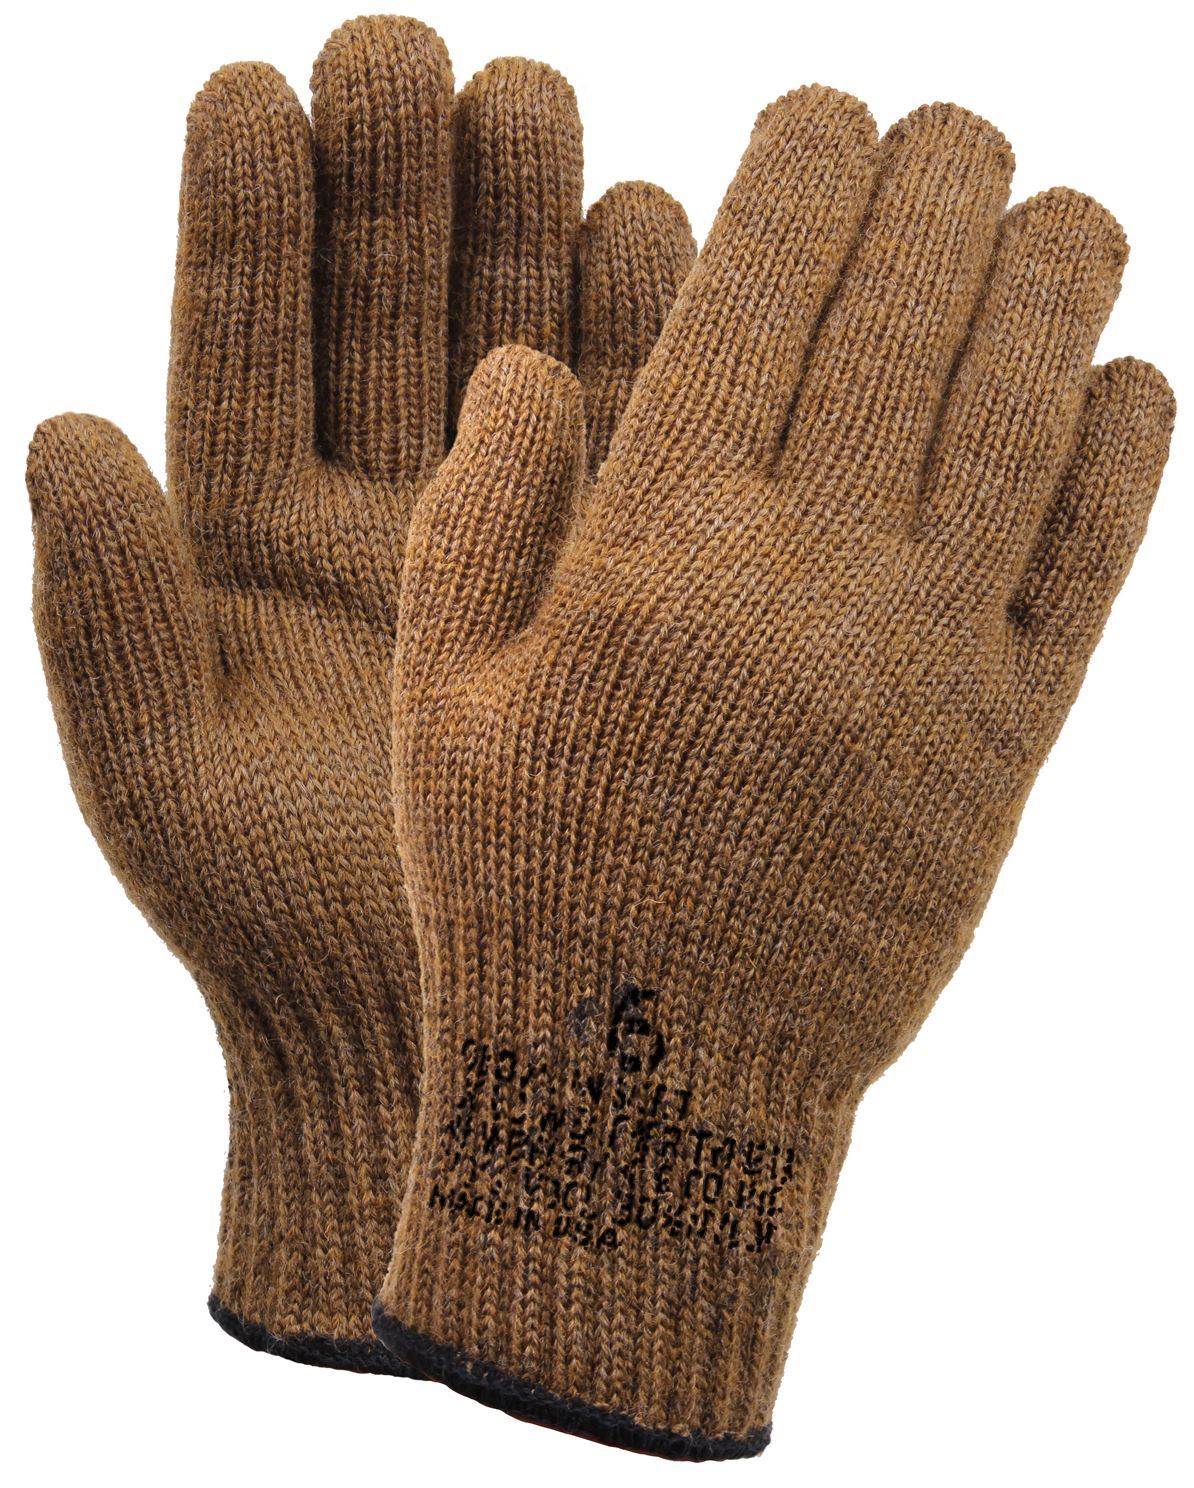 Tactical G.I. Glove Liners Color : Coyote Brown, Size : 6 (5 per pack)